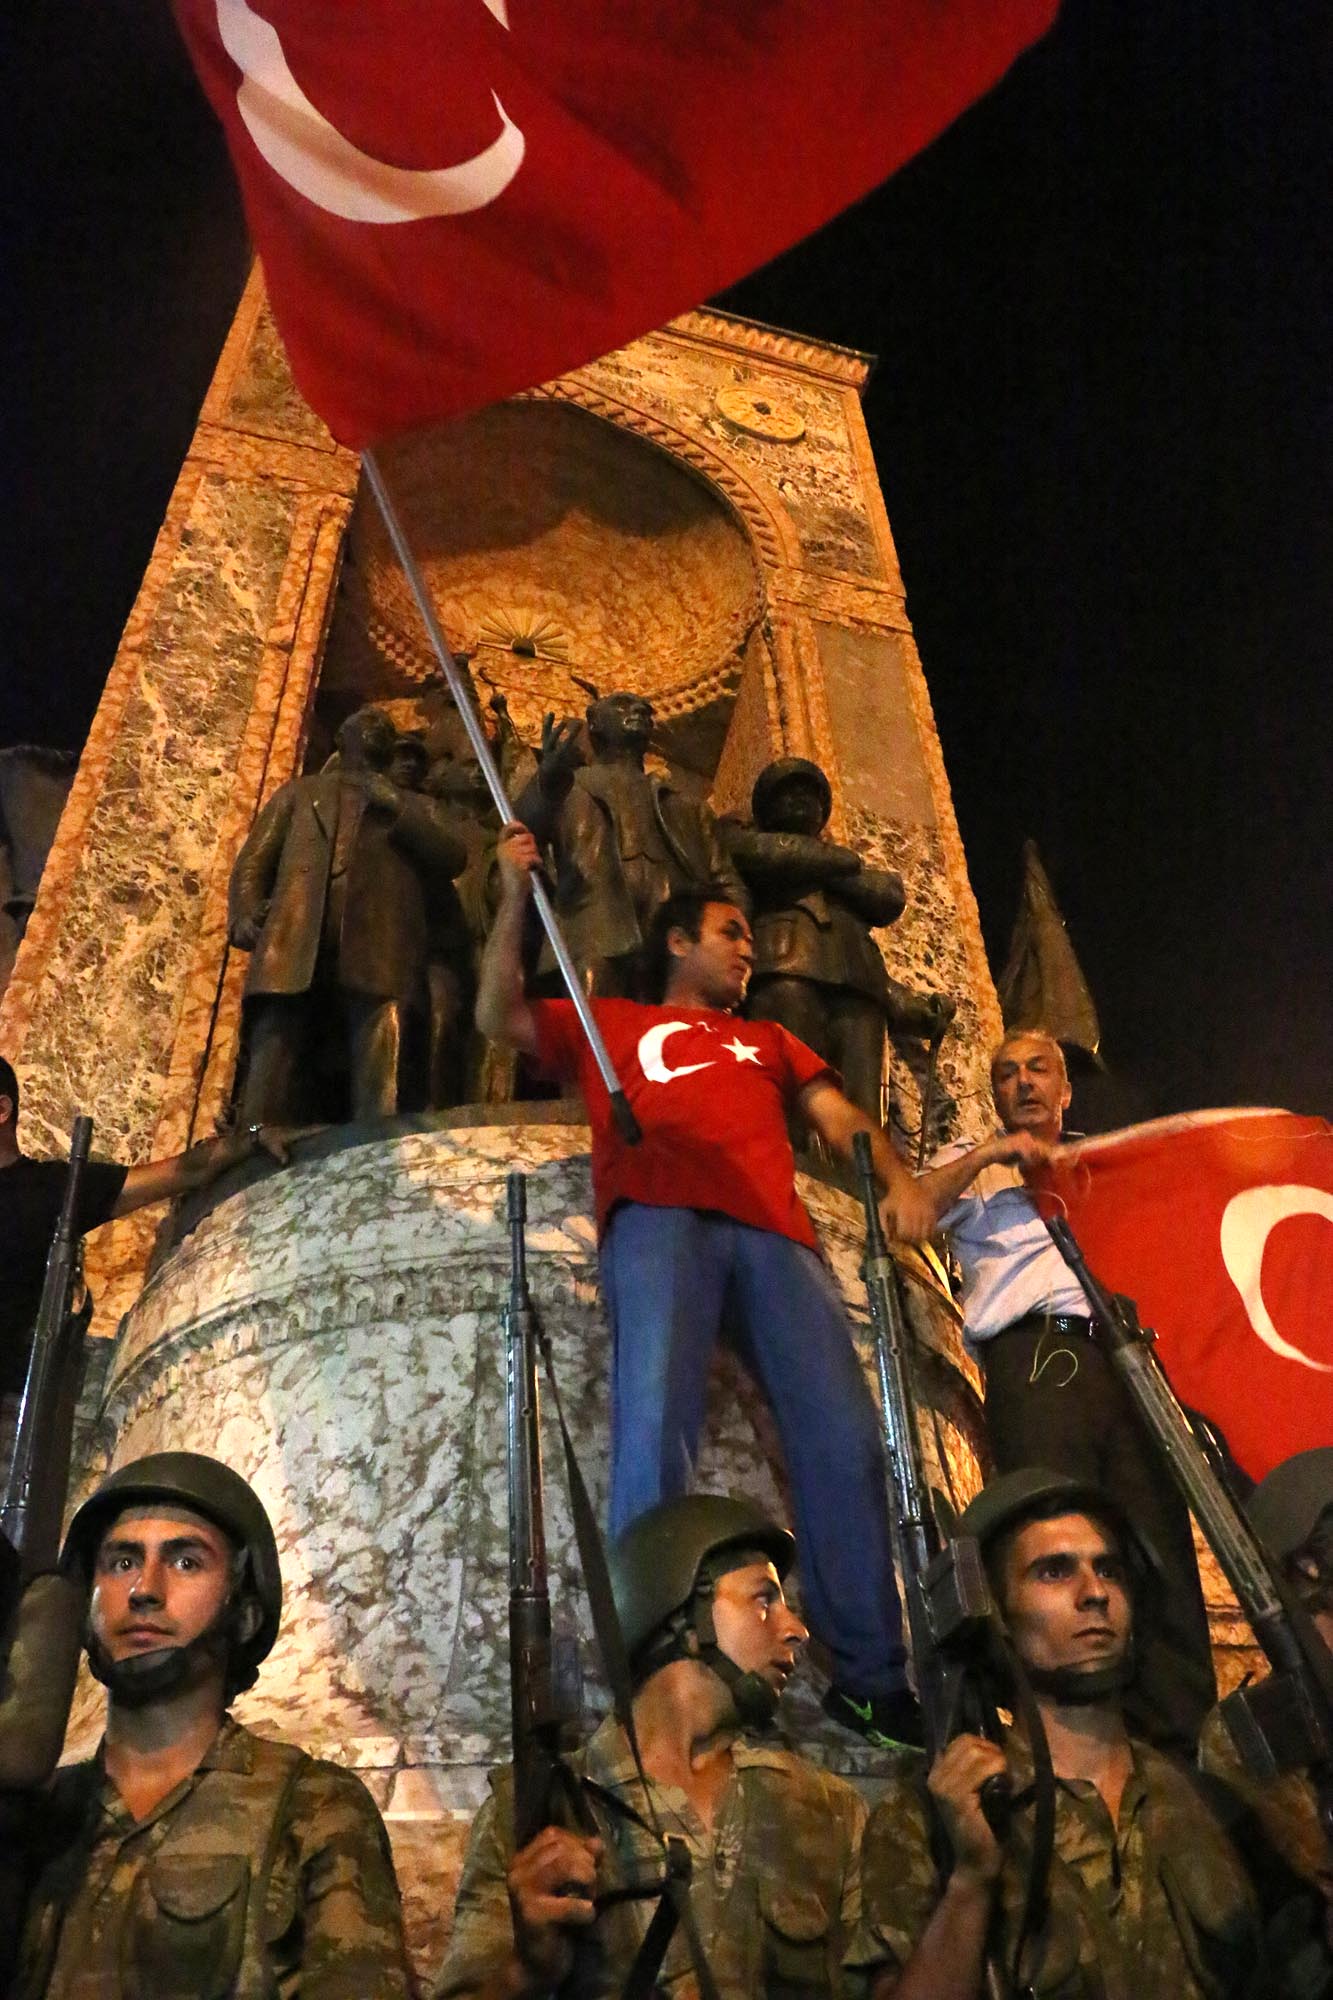 Coup soldiers started leaving the area after the people gathered in Taksim Square.